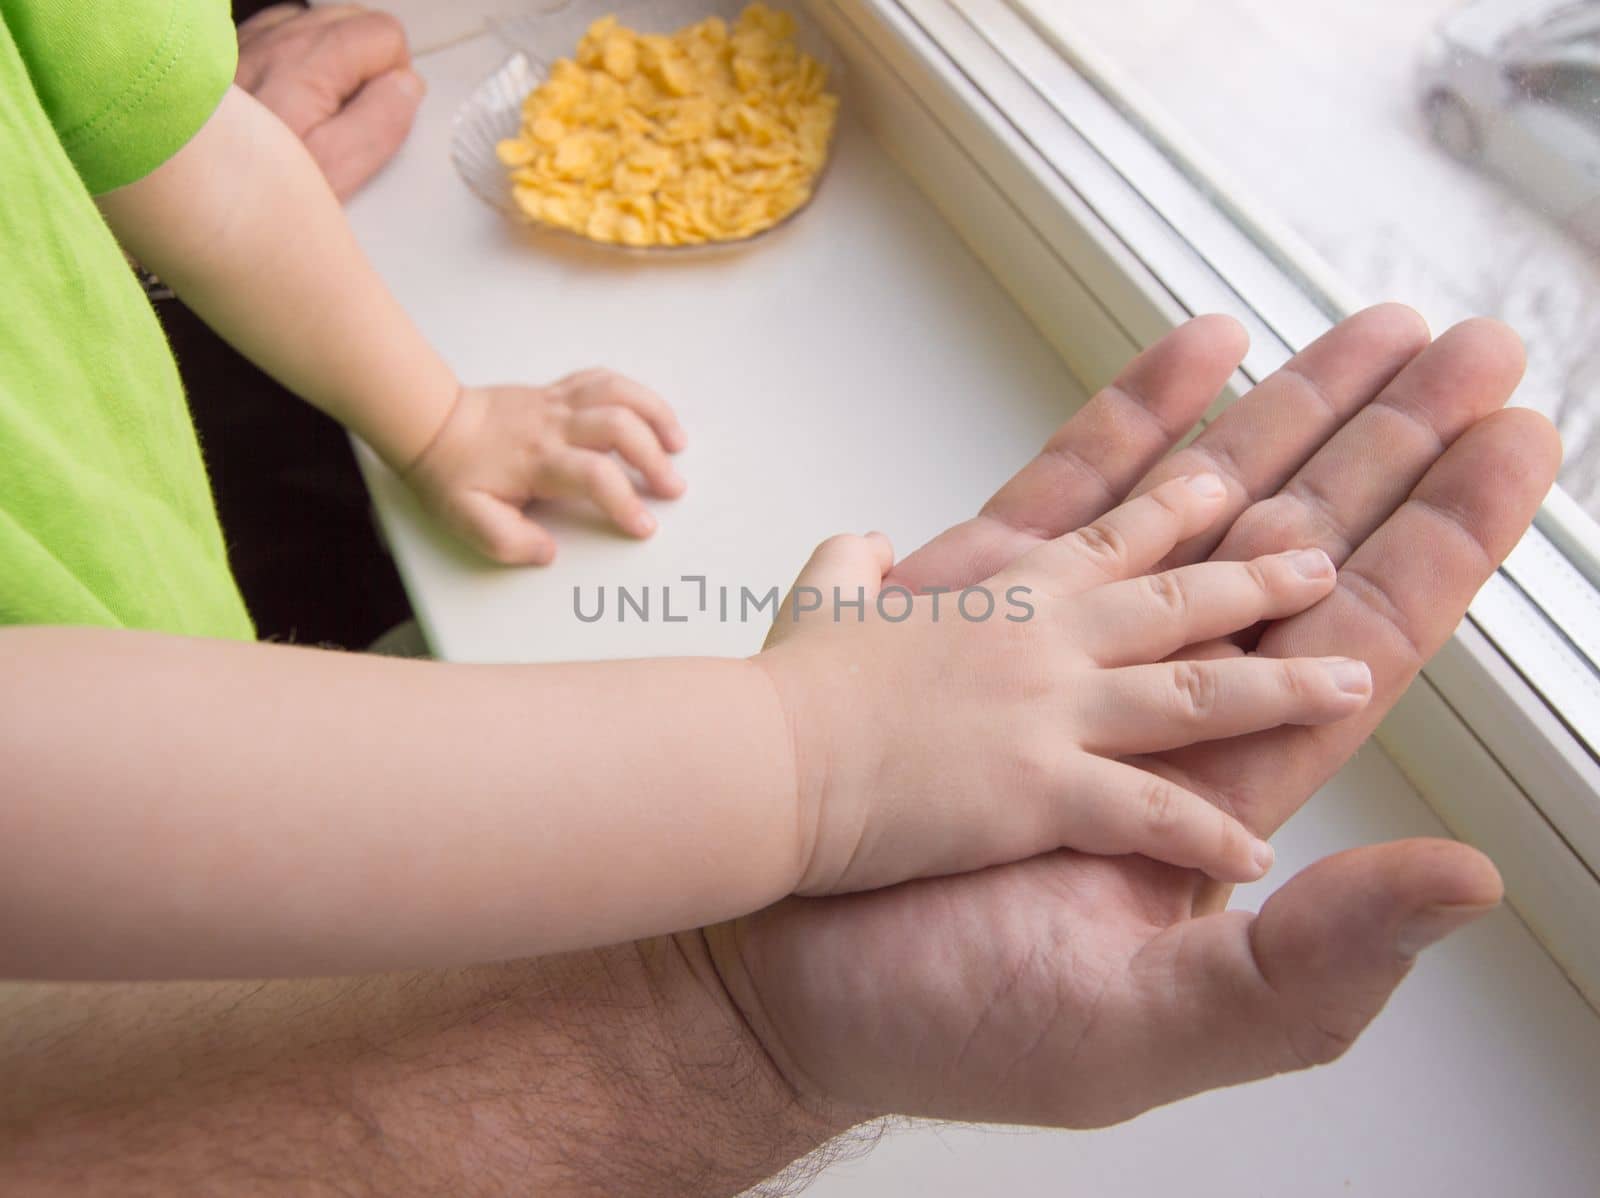 The child's hand rests on the palm of an adult male, child protection by claire_lucia